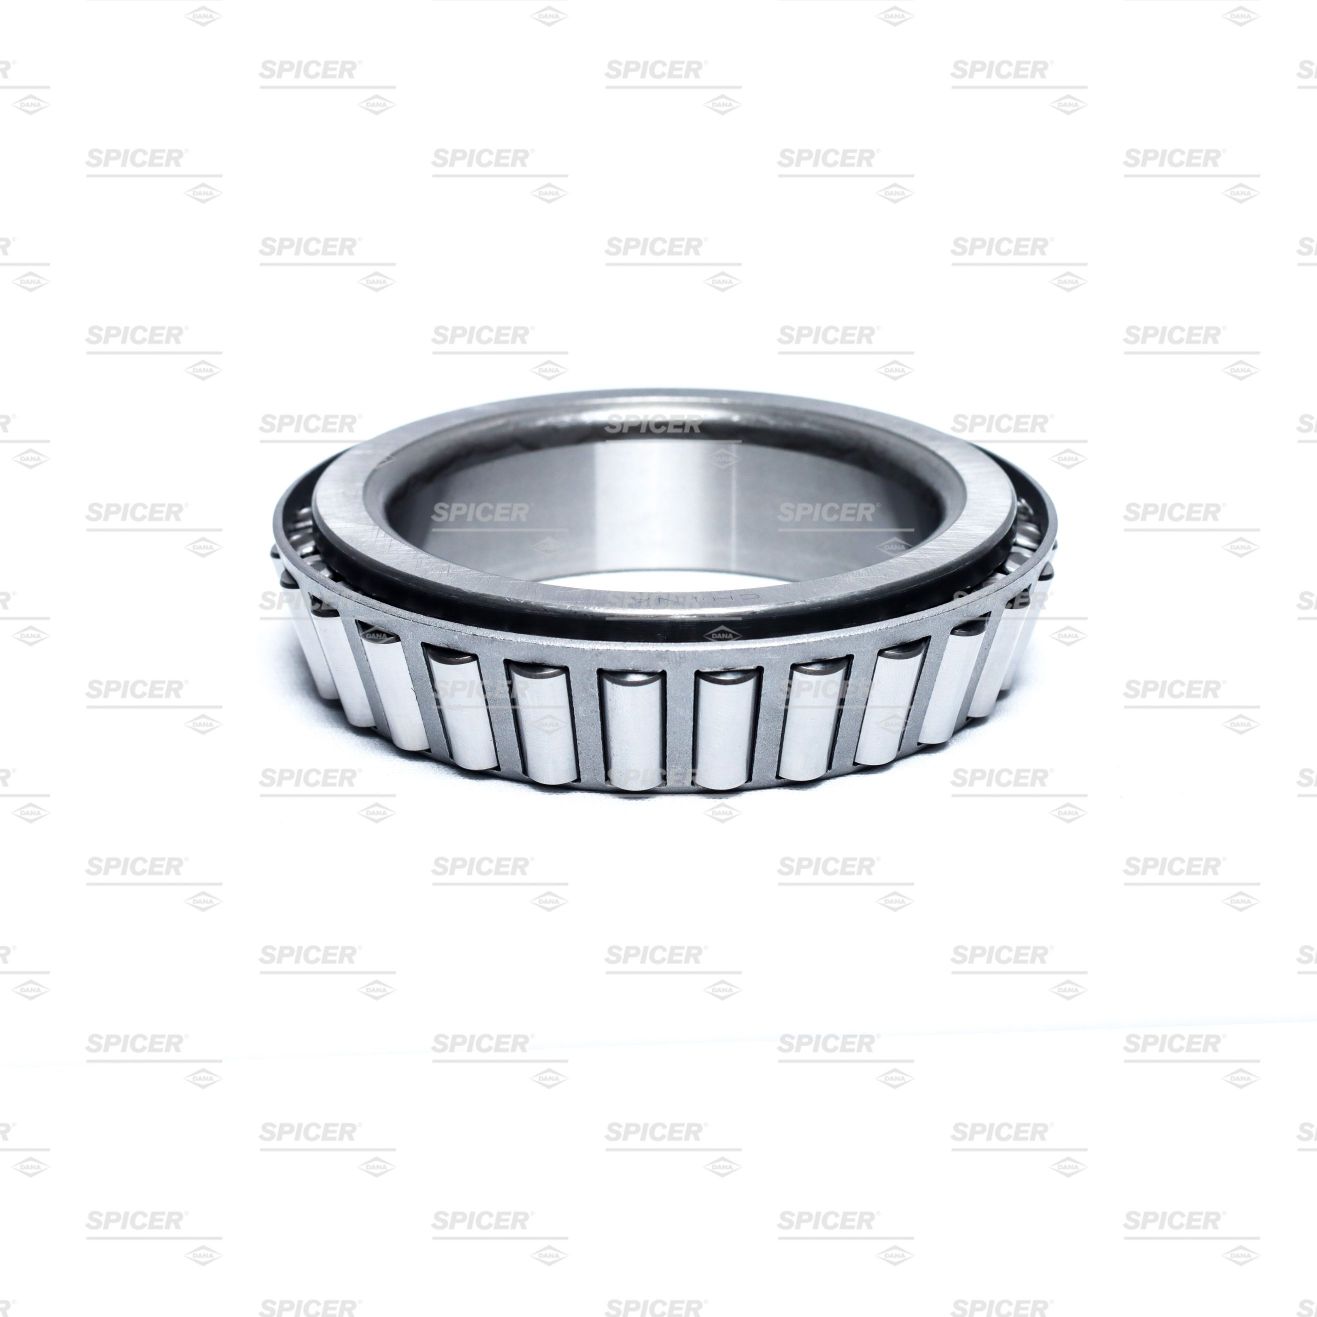 Spicer + Axle + Bearing + Bearing - Cone + A20HB100_SP + buy